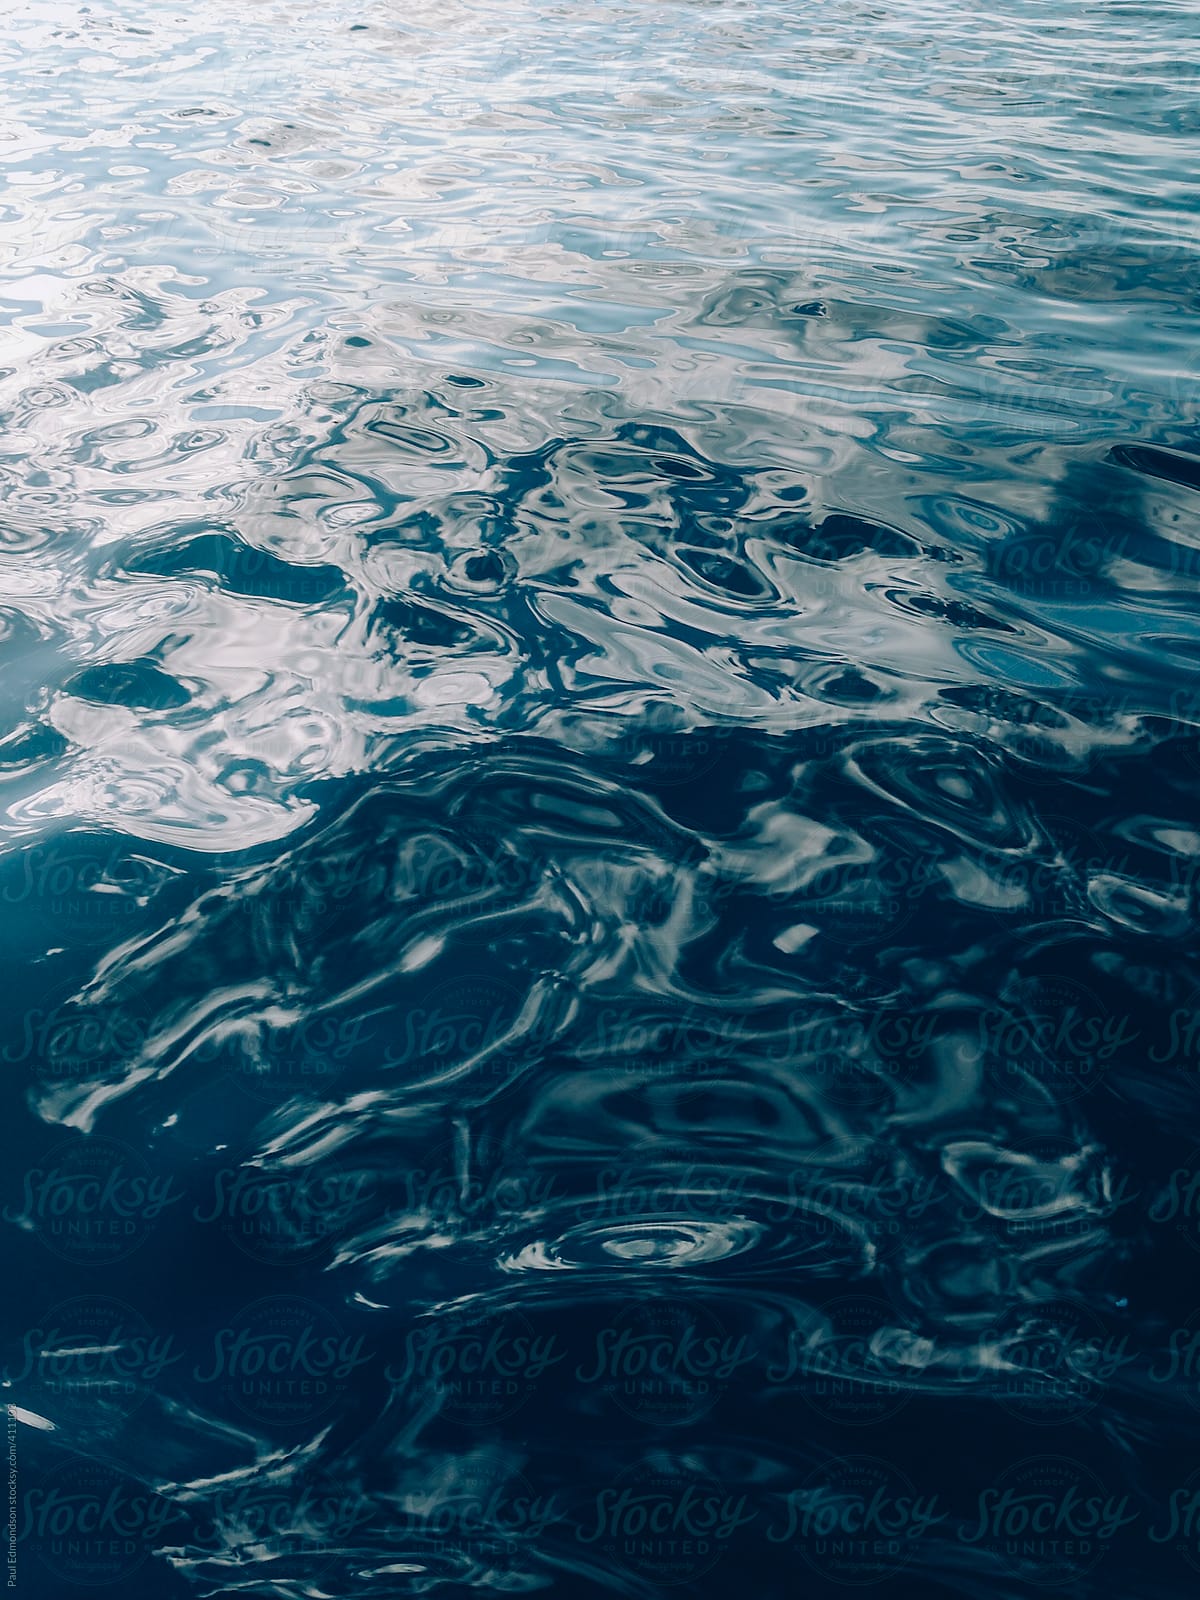 Reflections and ripples on ocean water